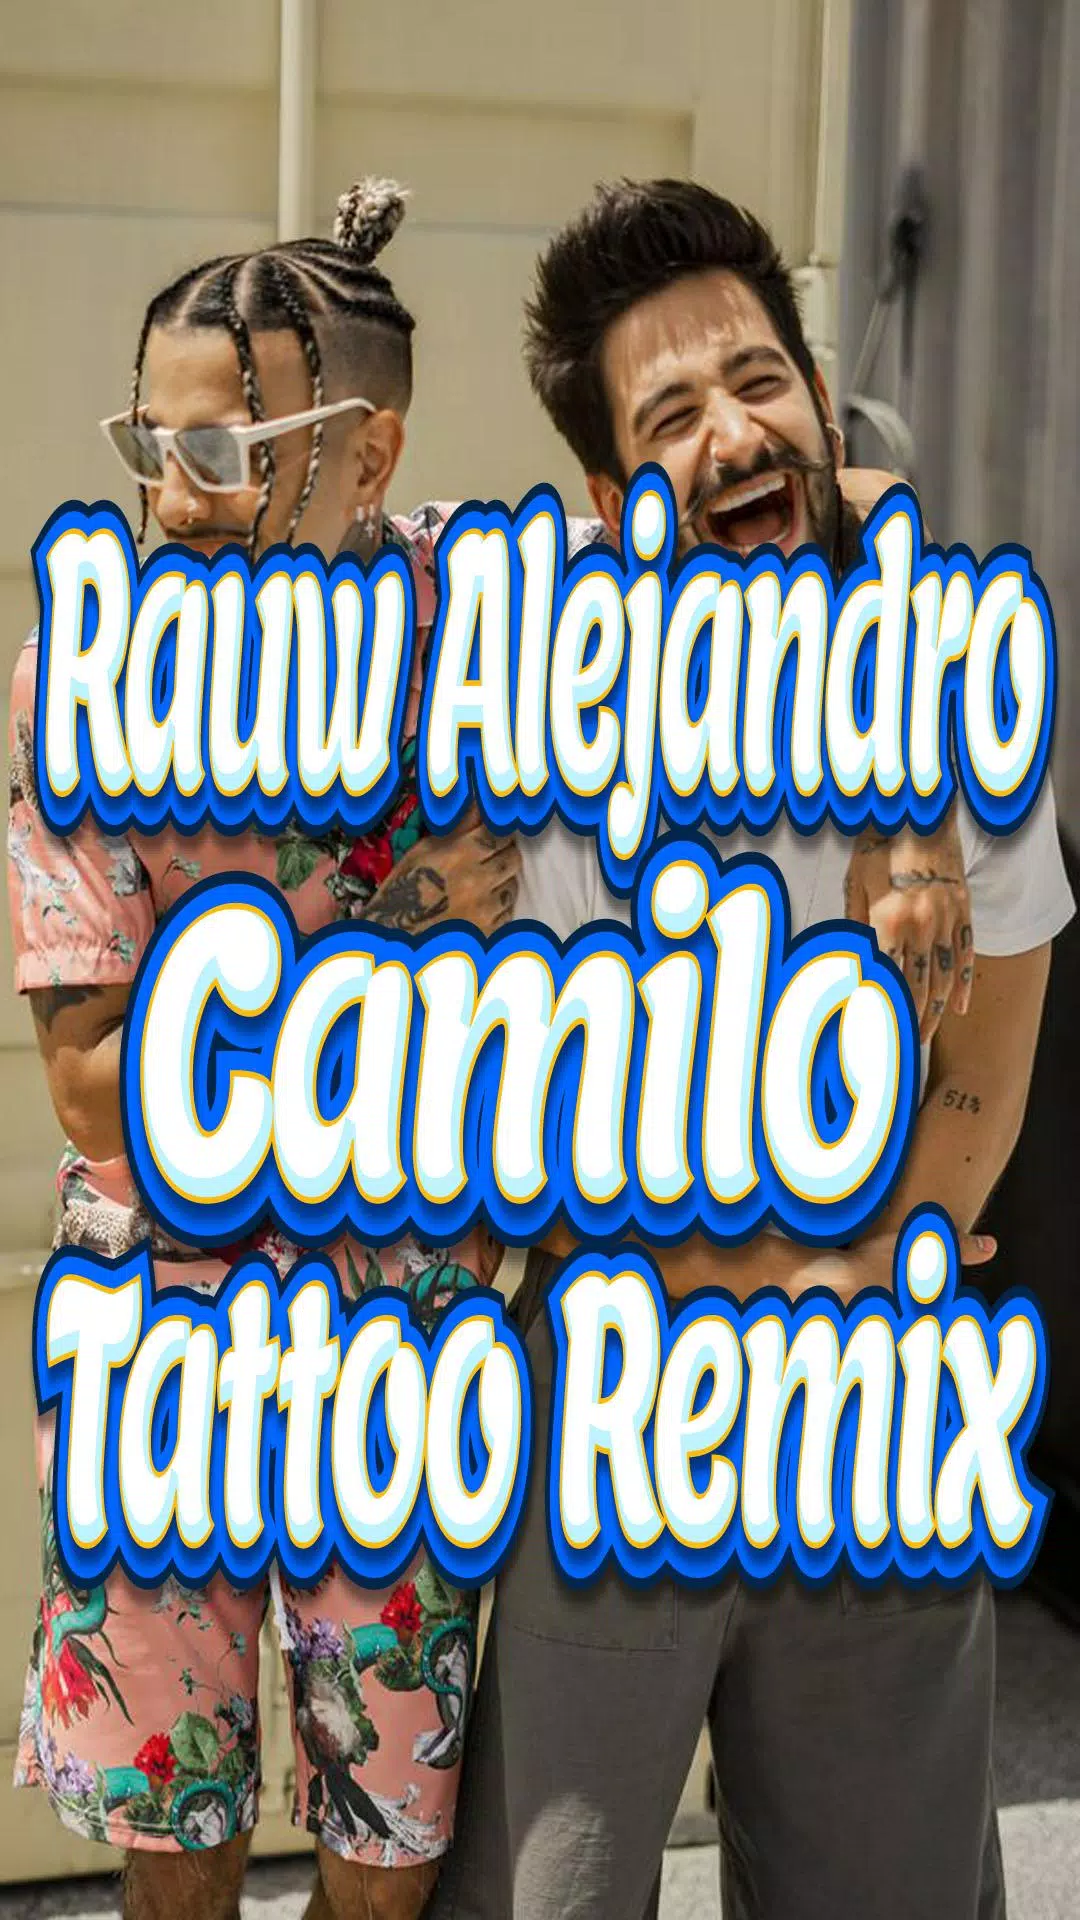 Rauw Alejandro y Camilo - Tattoo Remix for Android - APK Download